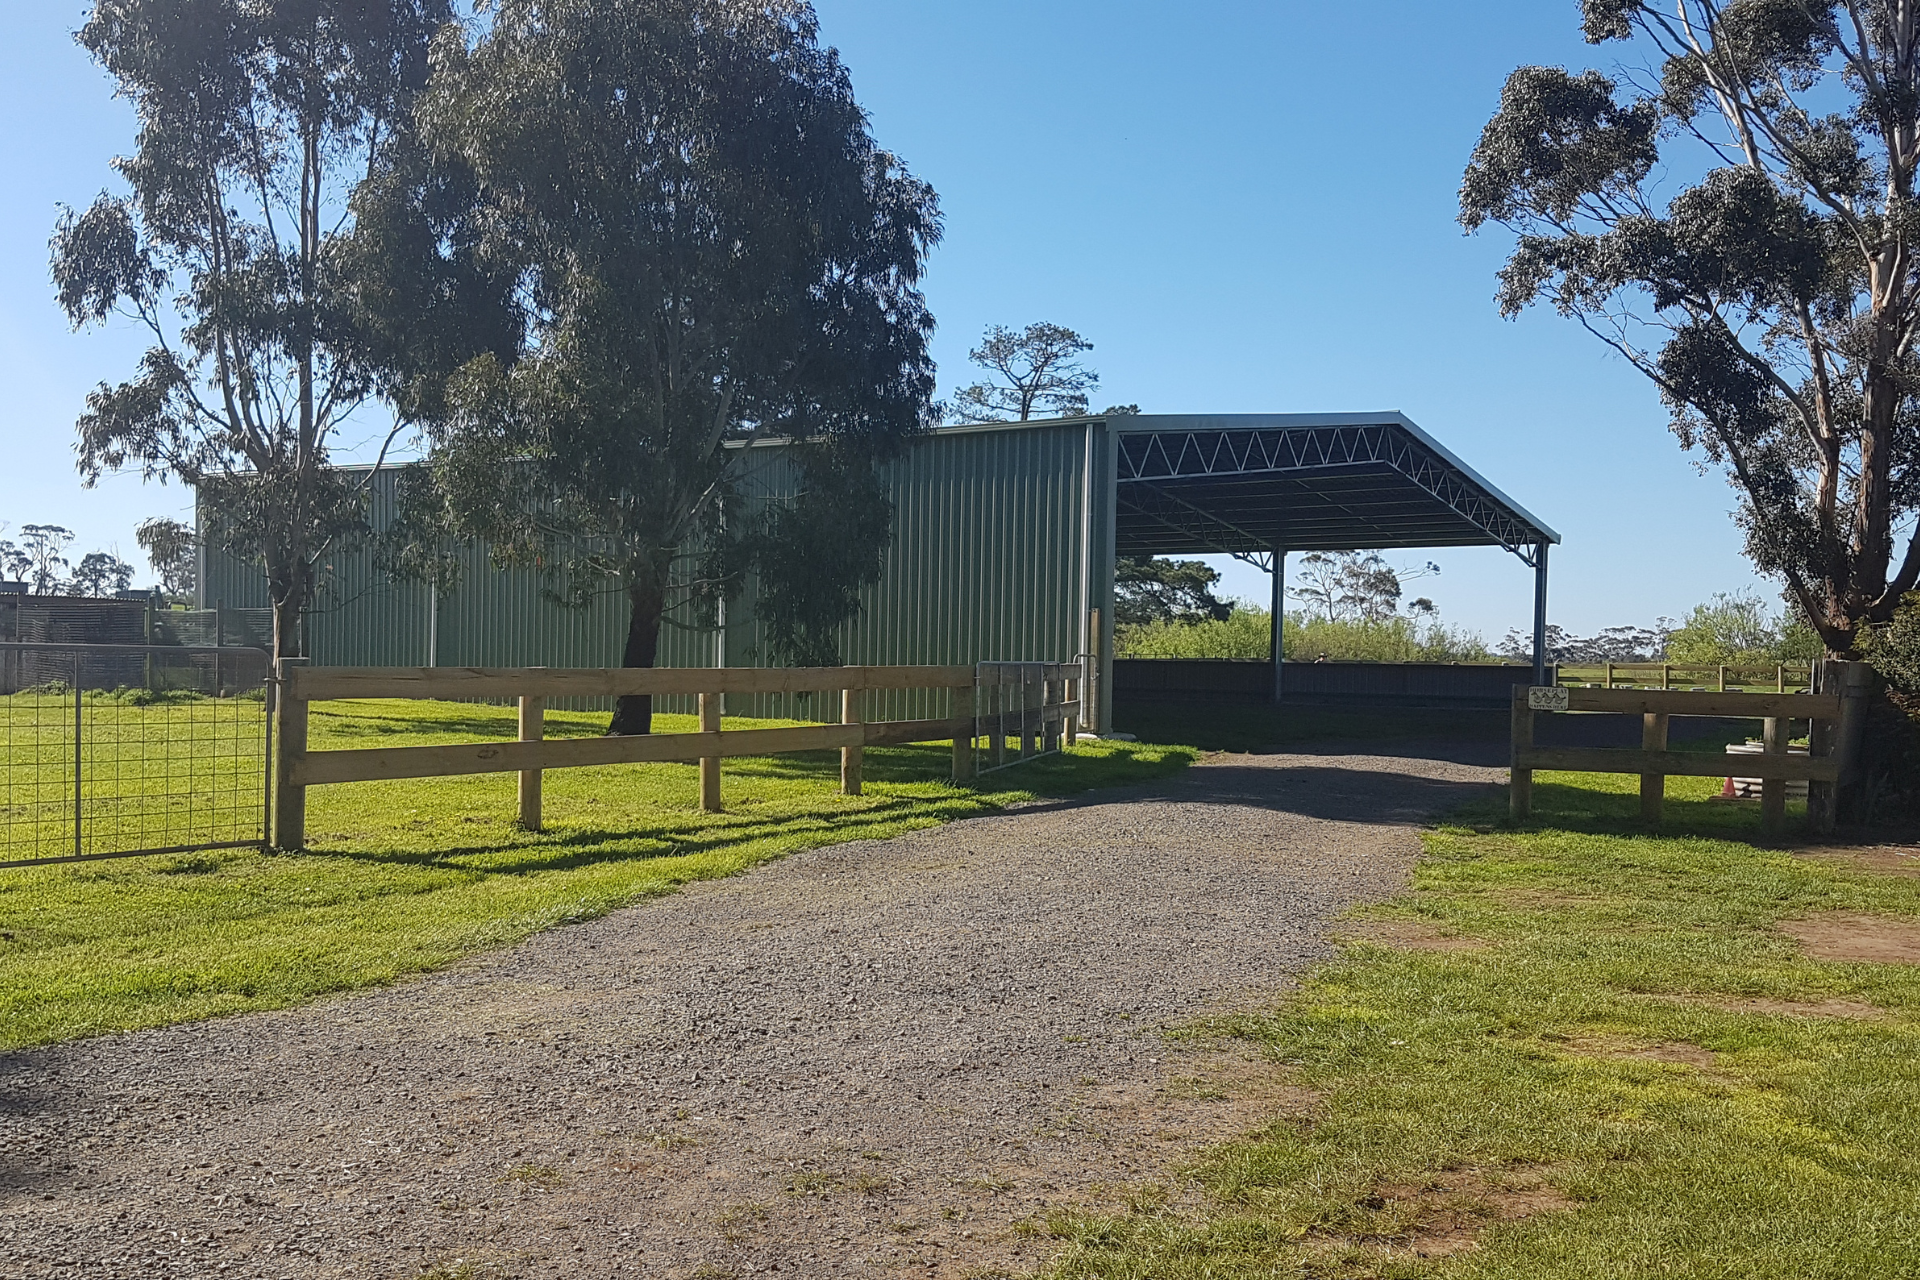 A 21m x 24m x 4.5m horse arena cover at Millbrook VIC